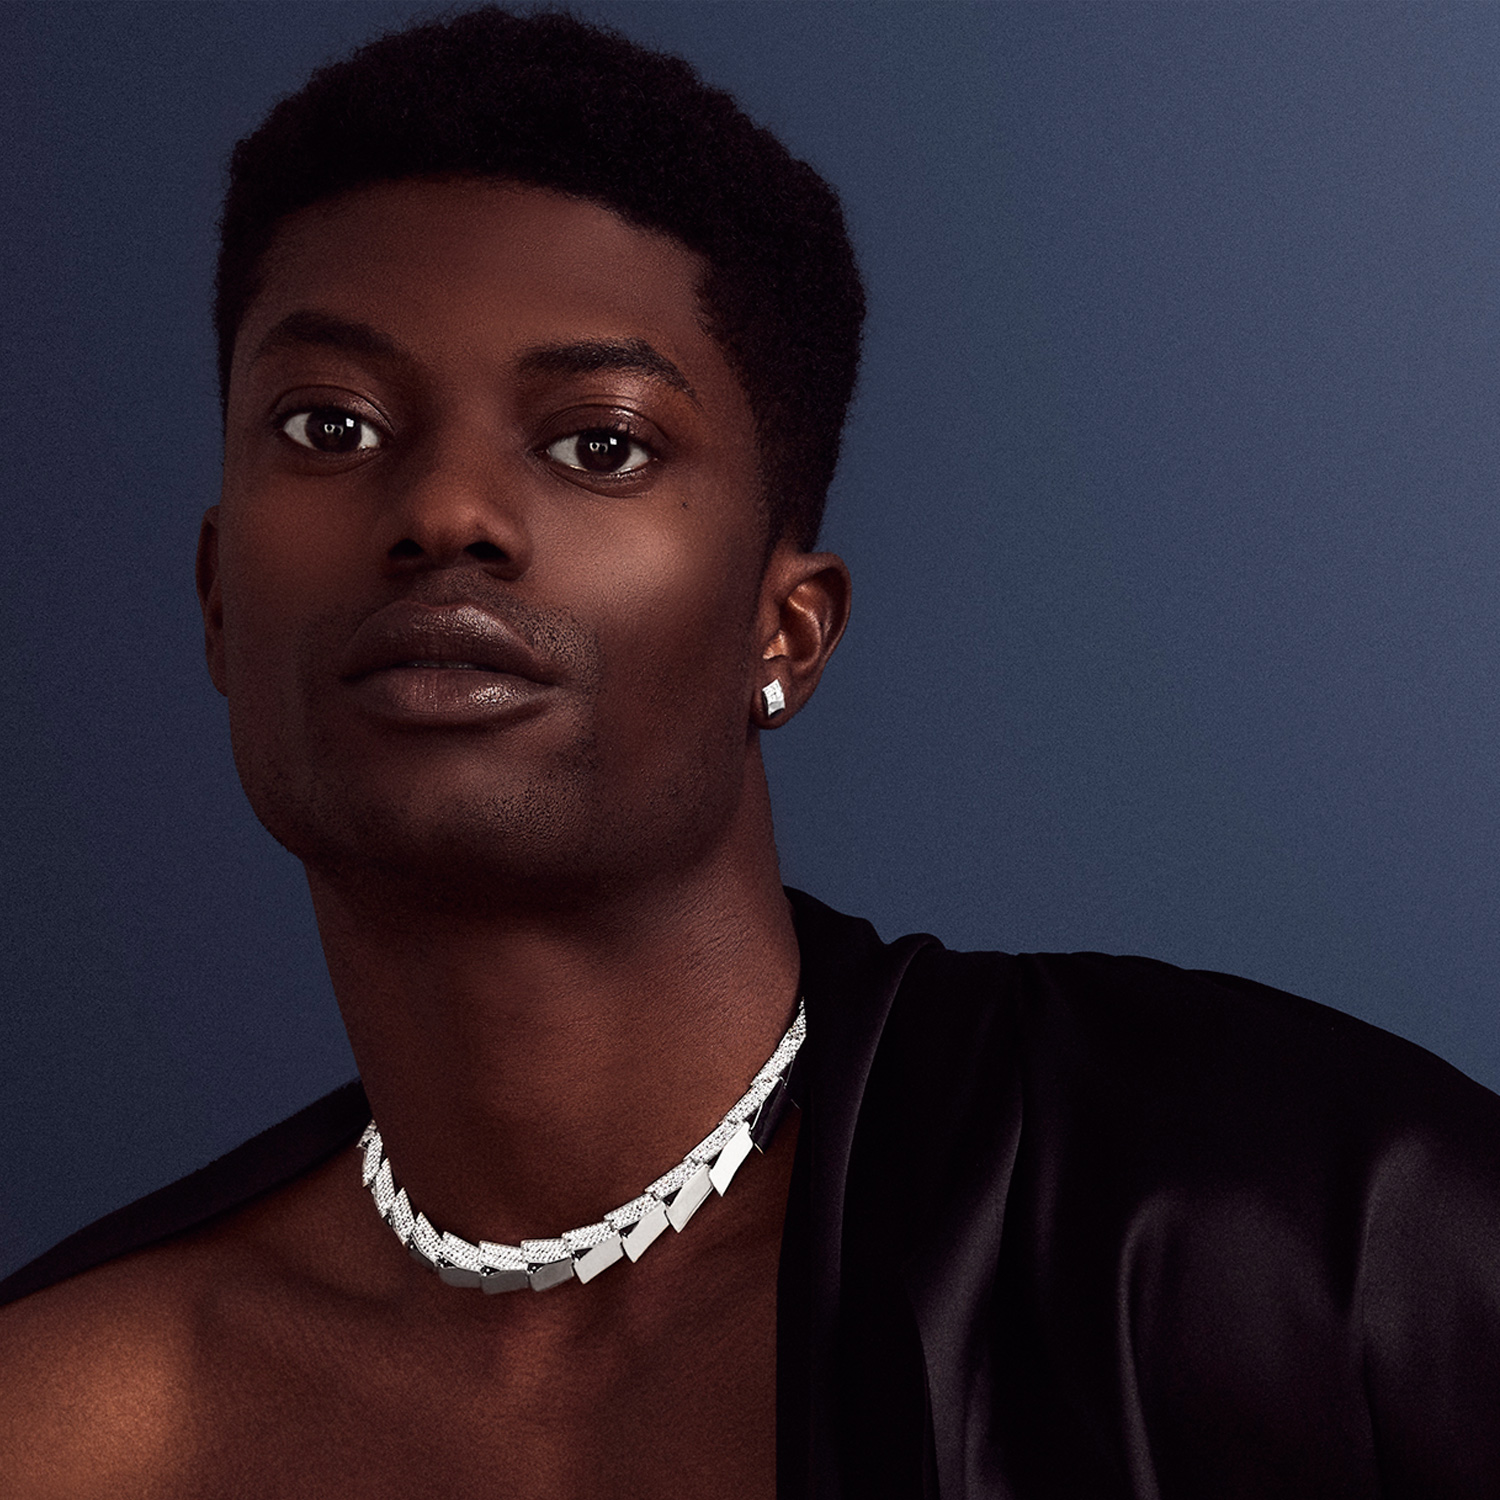 This is a photo of a male model wearing the Renisis Light Halo Necklace crafted in Platinum with pavé diamonds. He is photographic in dramatic lighting that reflects off the necklace.